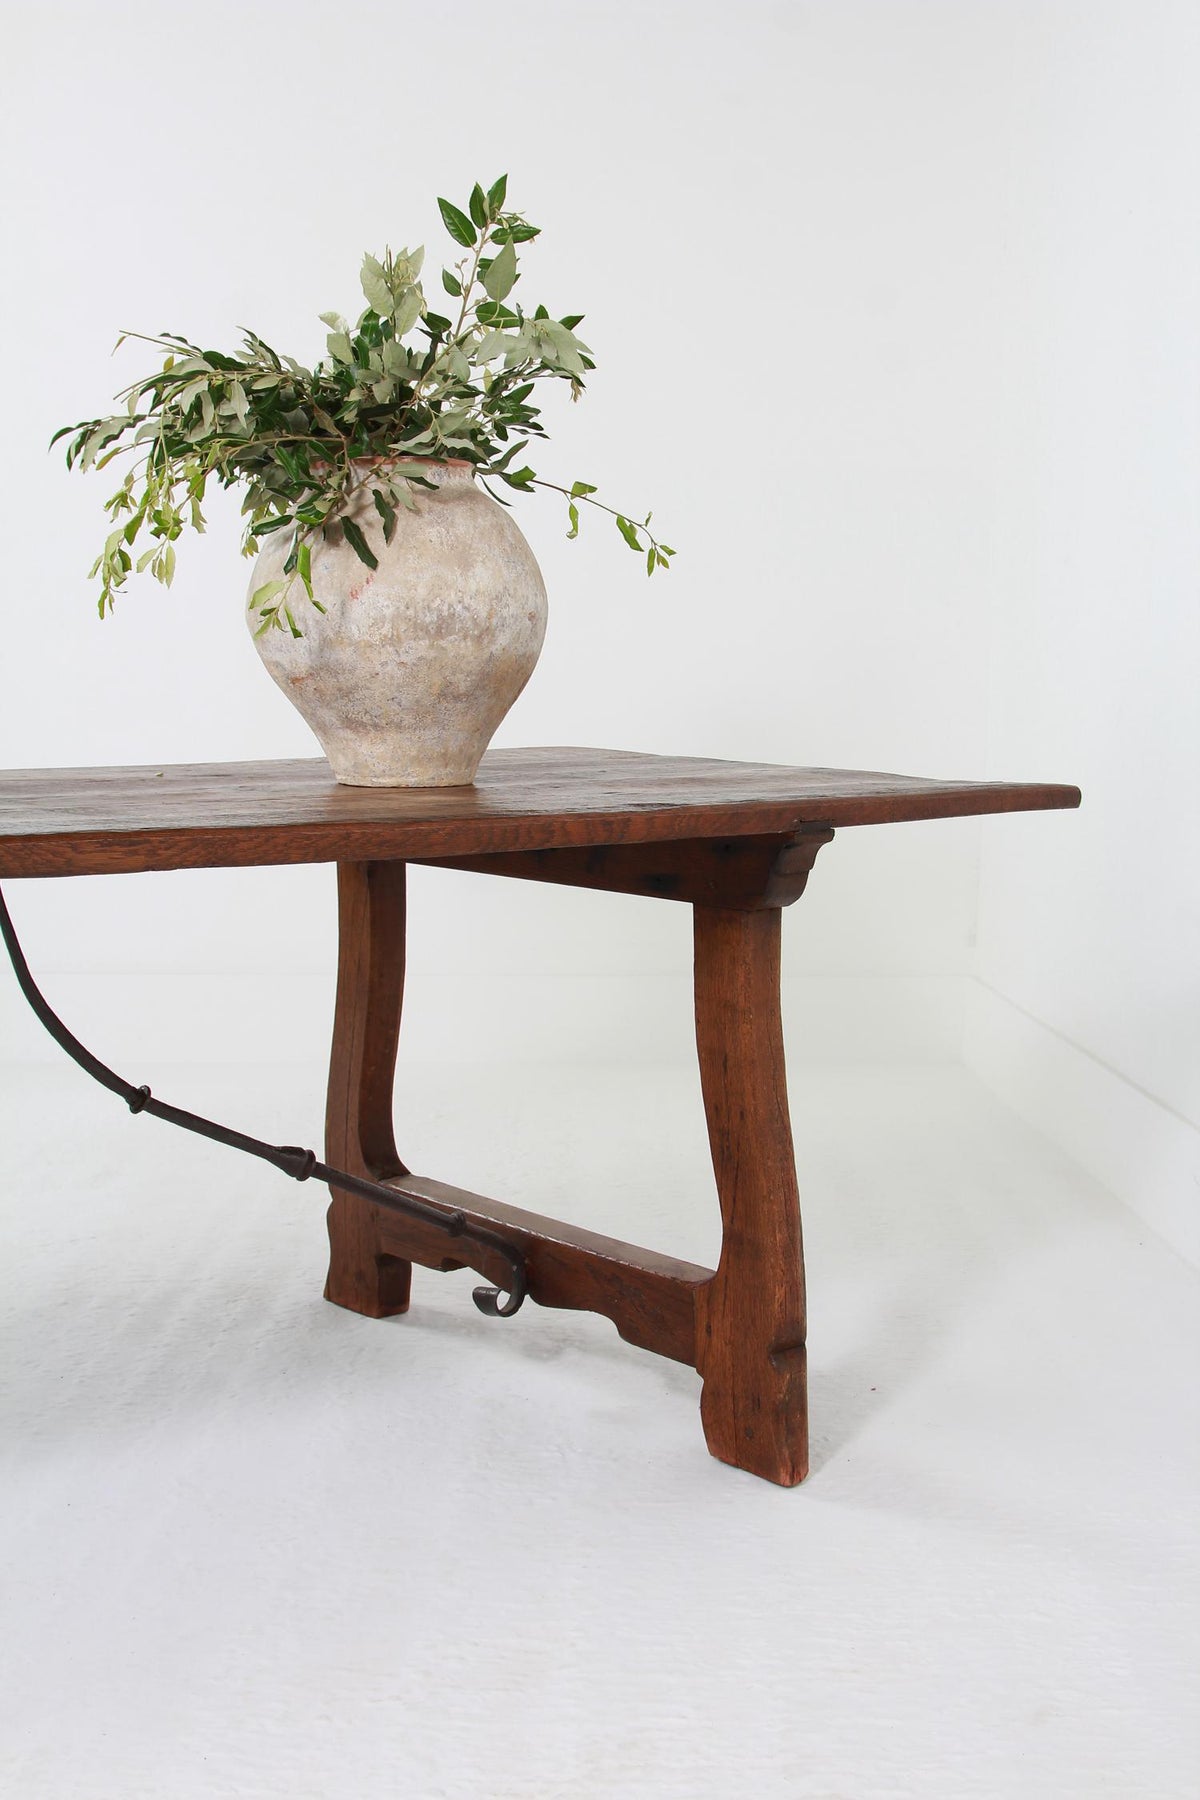 Huge Antique SPANISH 19THC Oak  DINING tABLE with Hand Forged Iron Supports